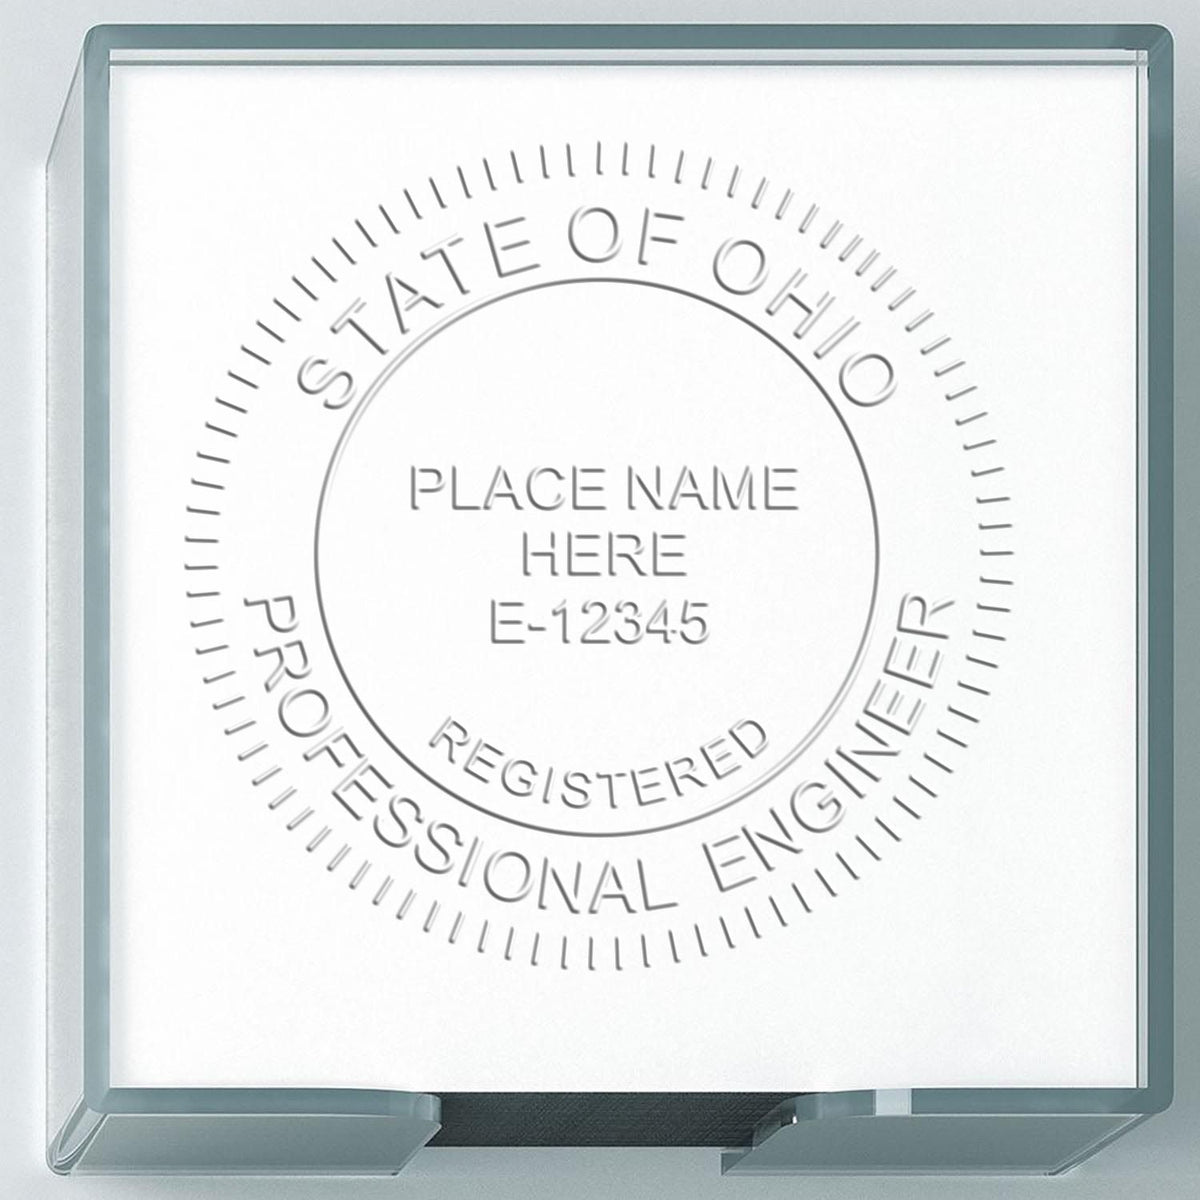 A photograph of the Soft Ohio Professional Engineer Seal stamp impression reveals a vivid, professional image of the on paper.